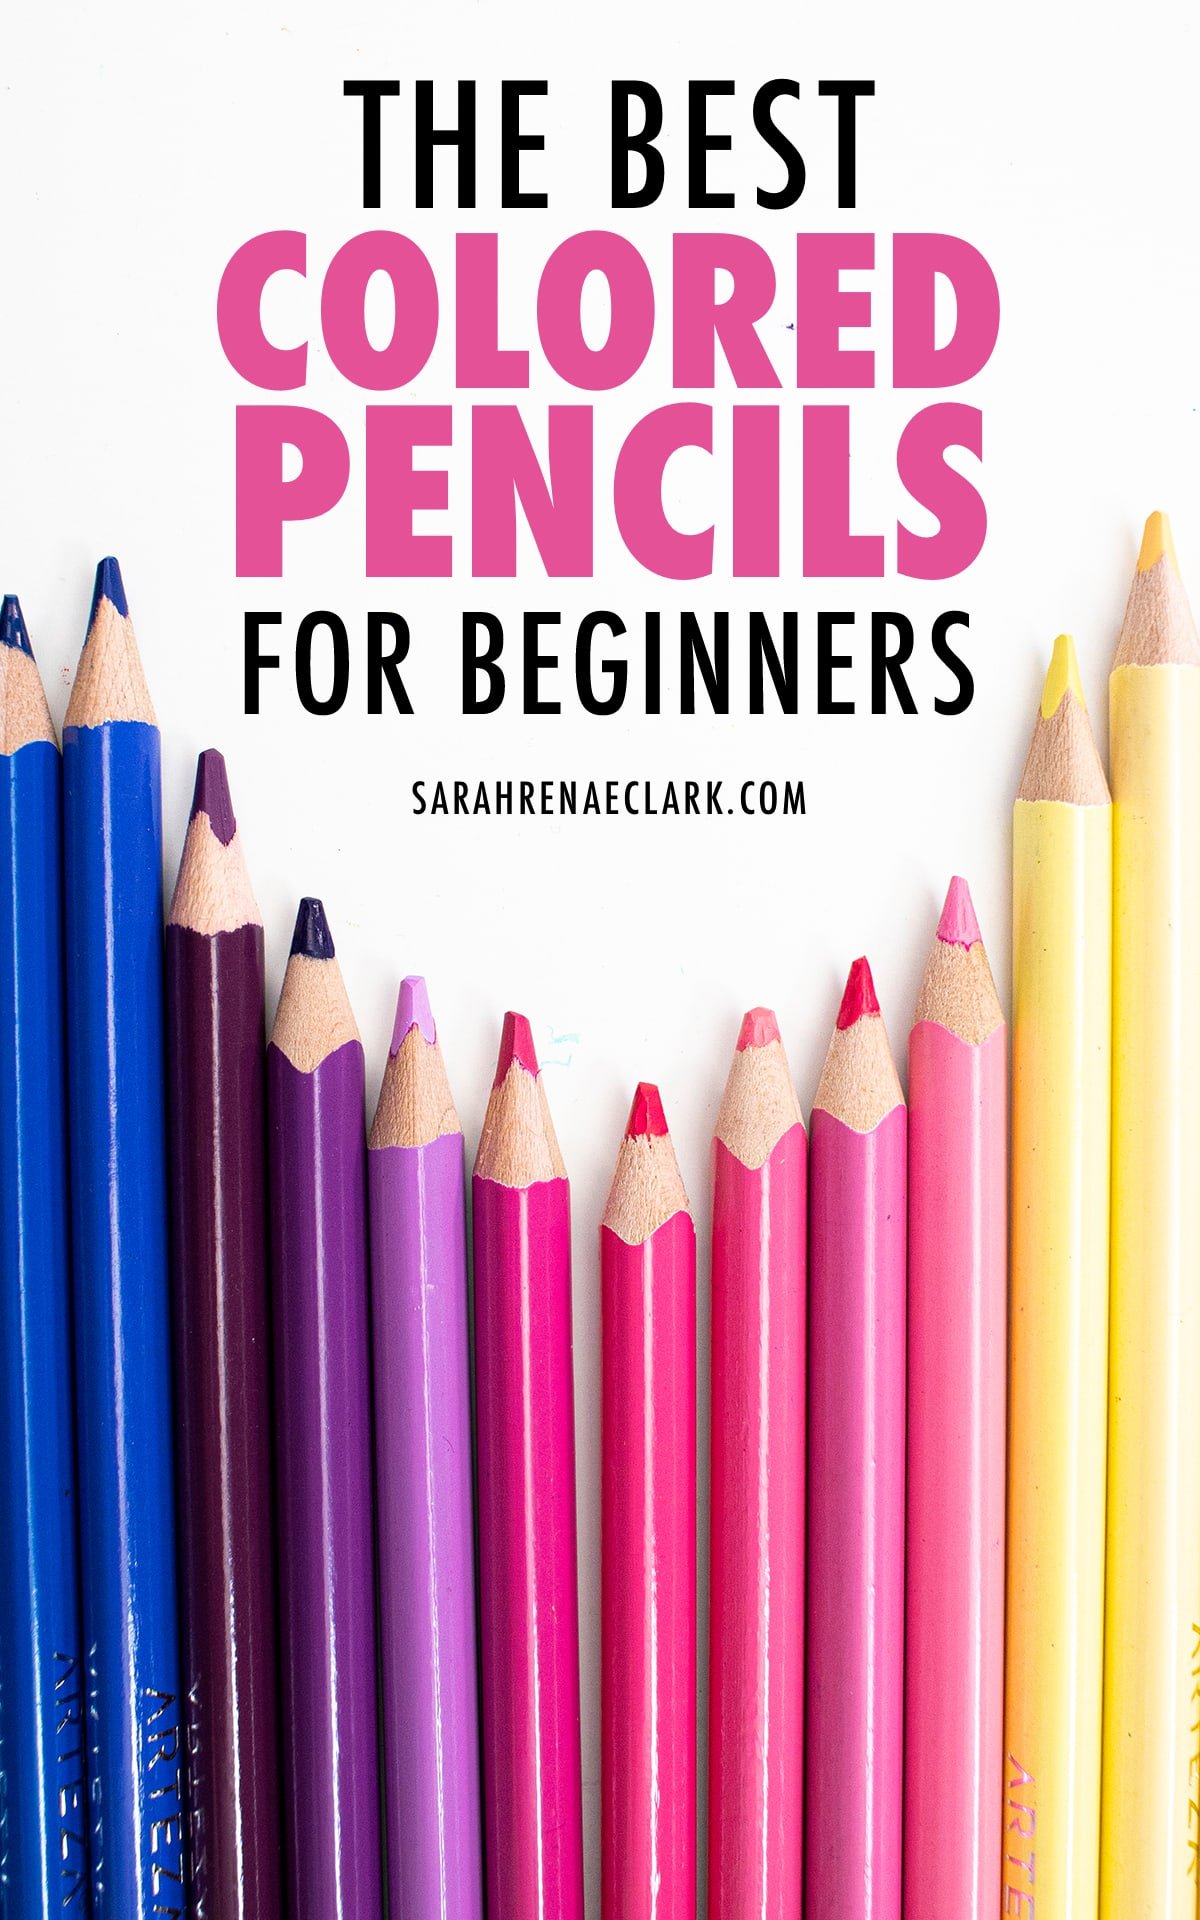 The Best Colored Pencils for Beginners